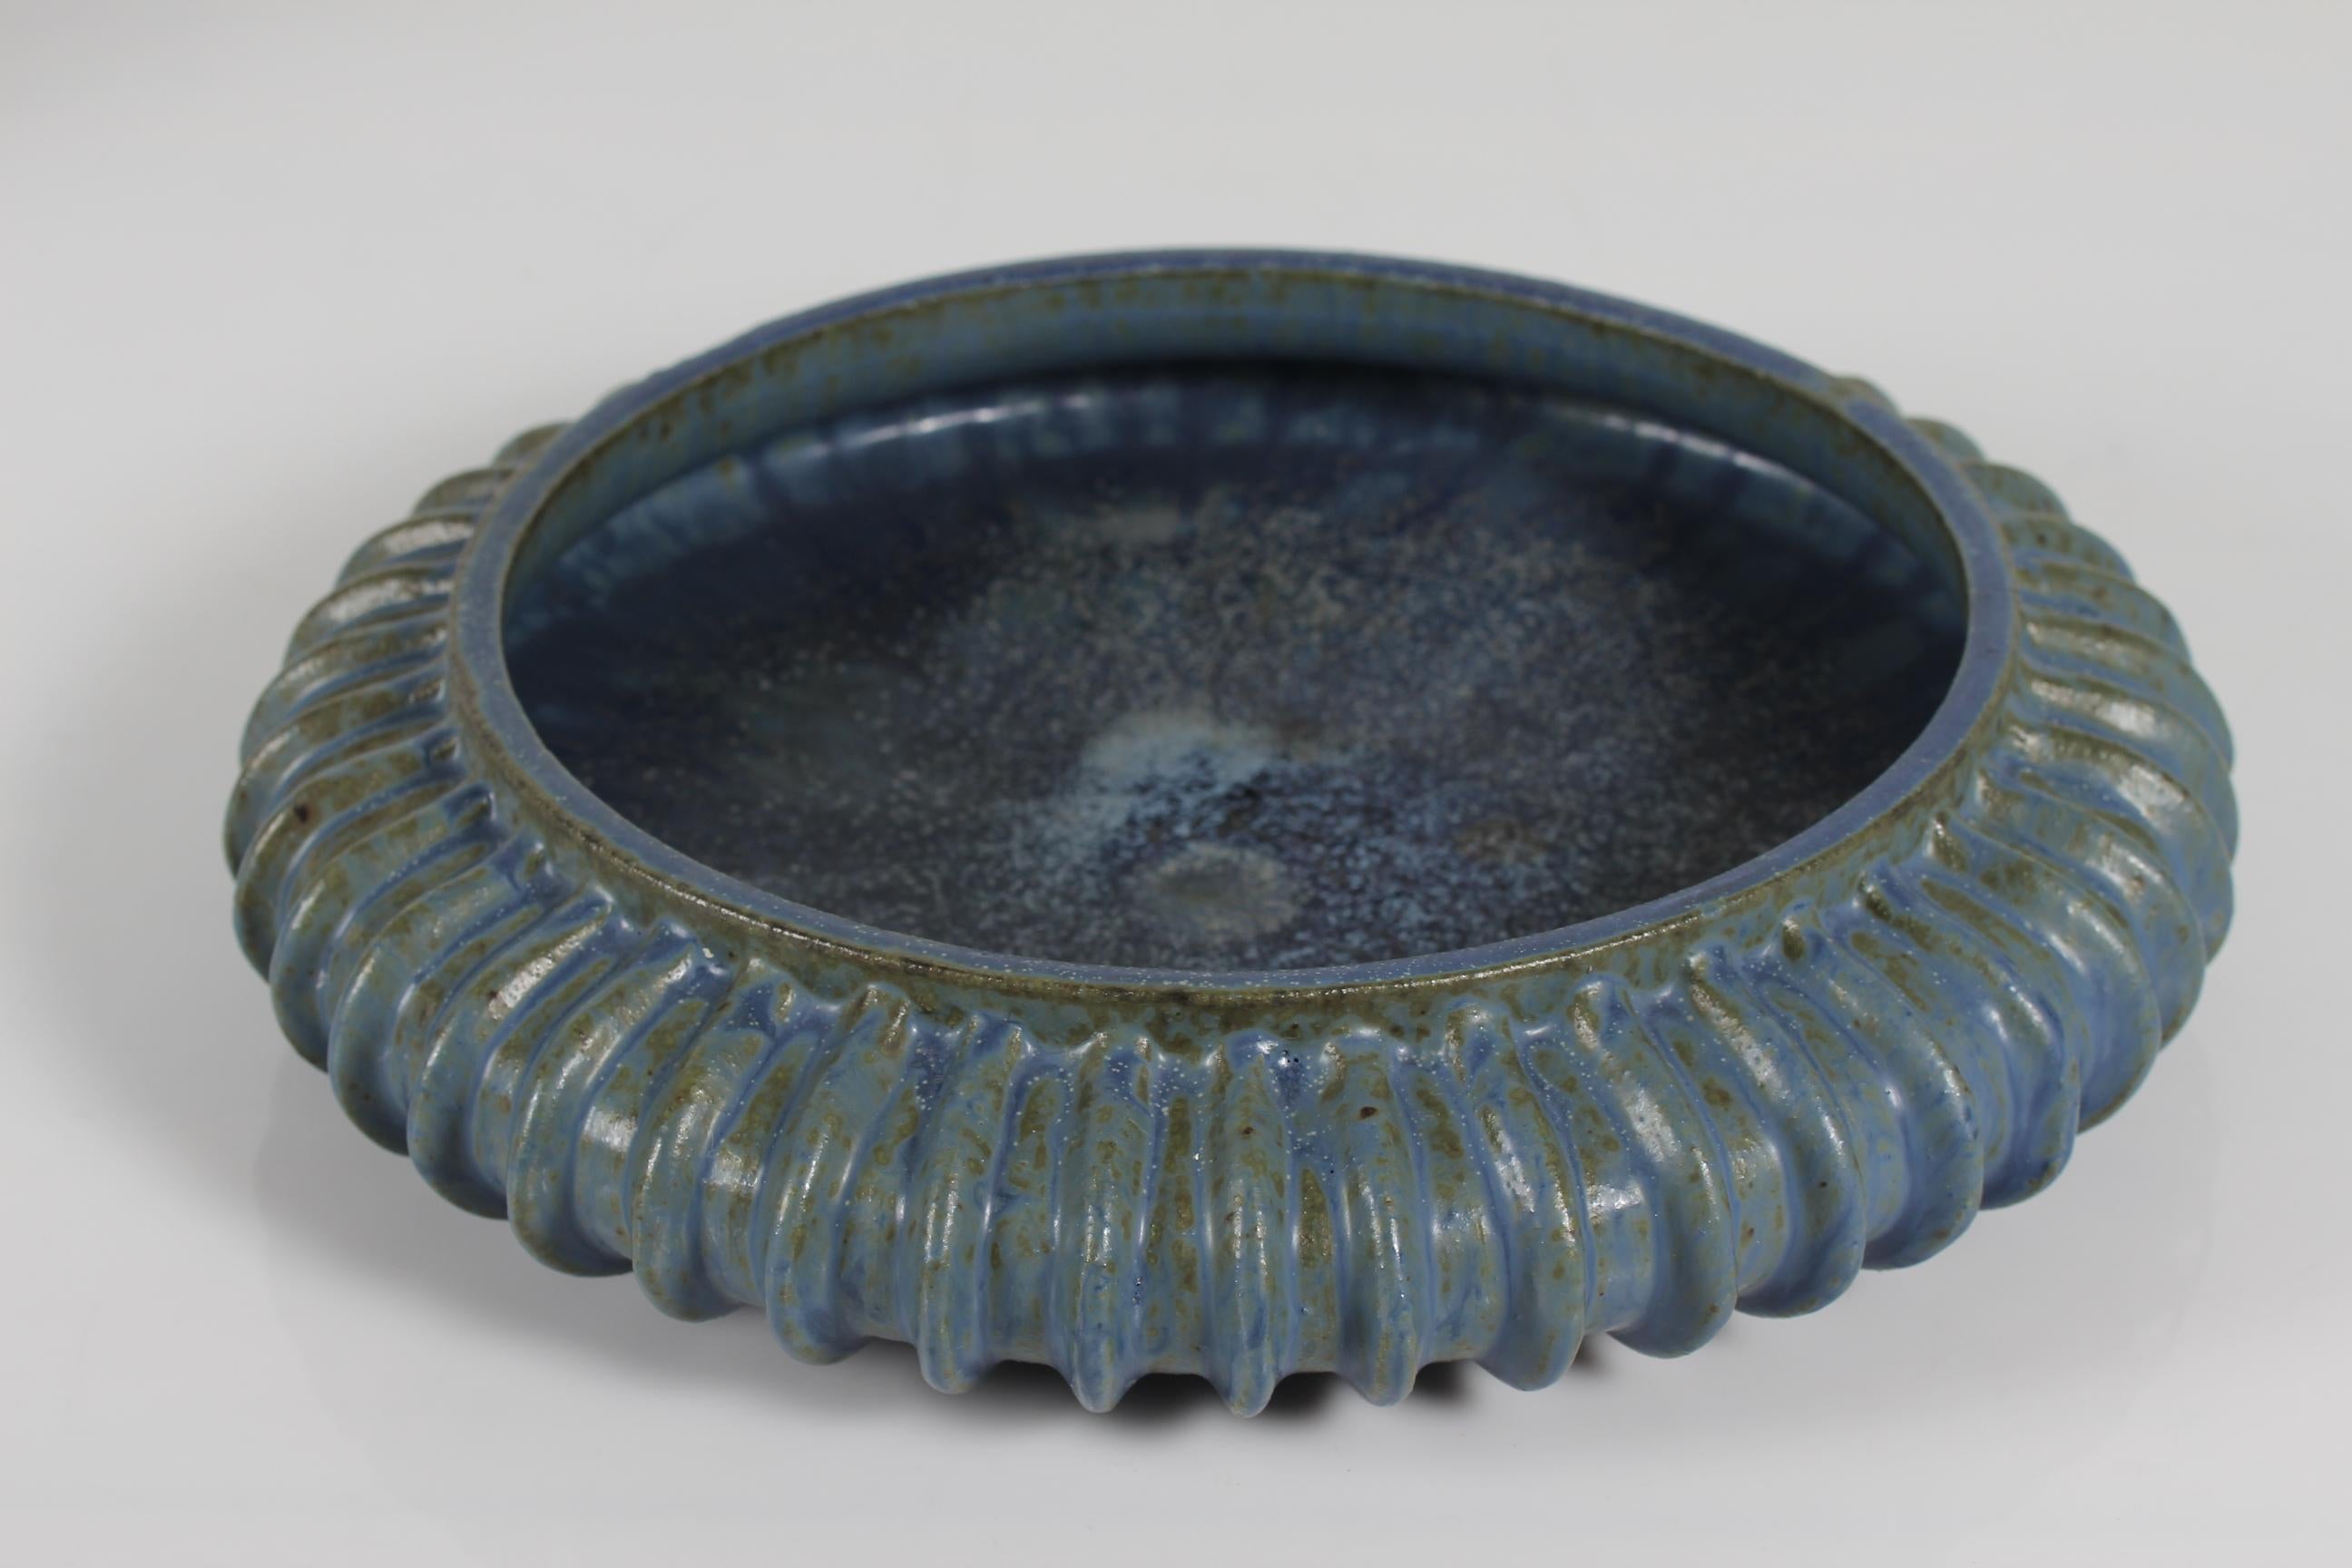 Huge Art Deco stoneware bowl from the 1930s model no. 154.
Designed by the Danish ceramist Arne Bang (1901-1983).

The bowl is decorated with glaze in shades of blue with green elements.
The outside of the bowl has a modeled pattern of grooves